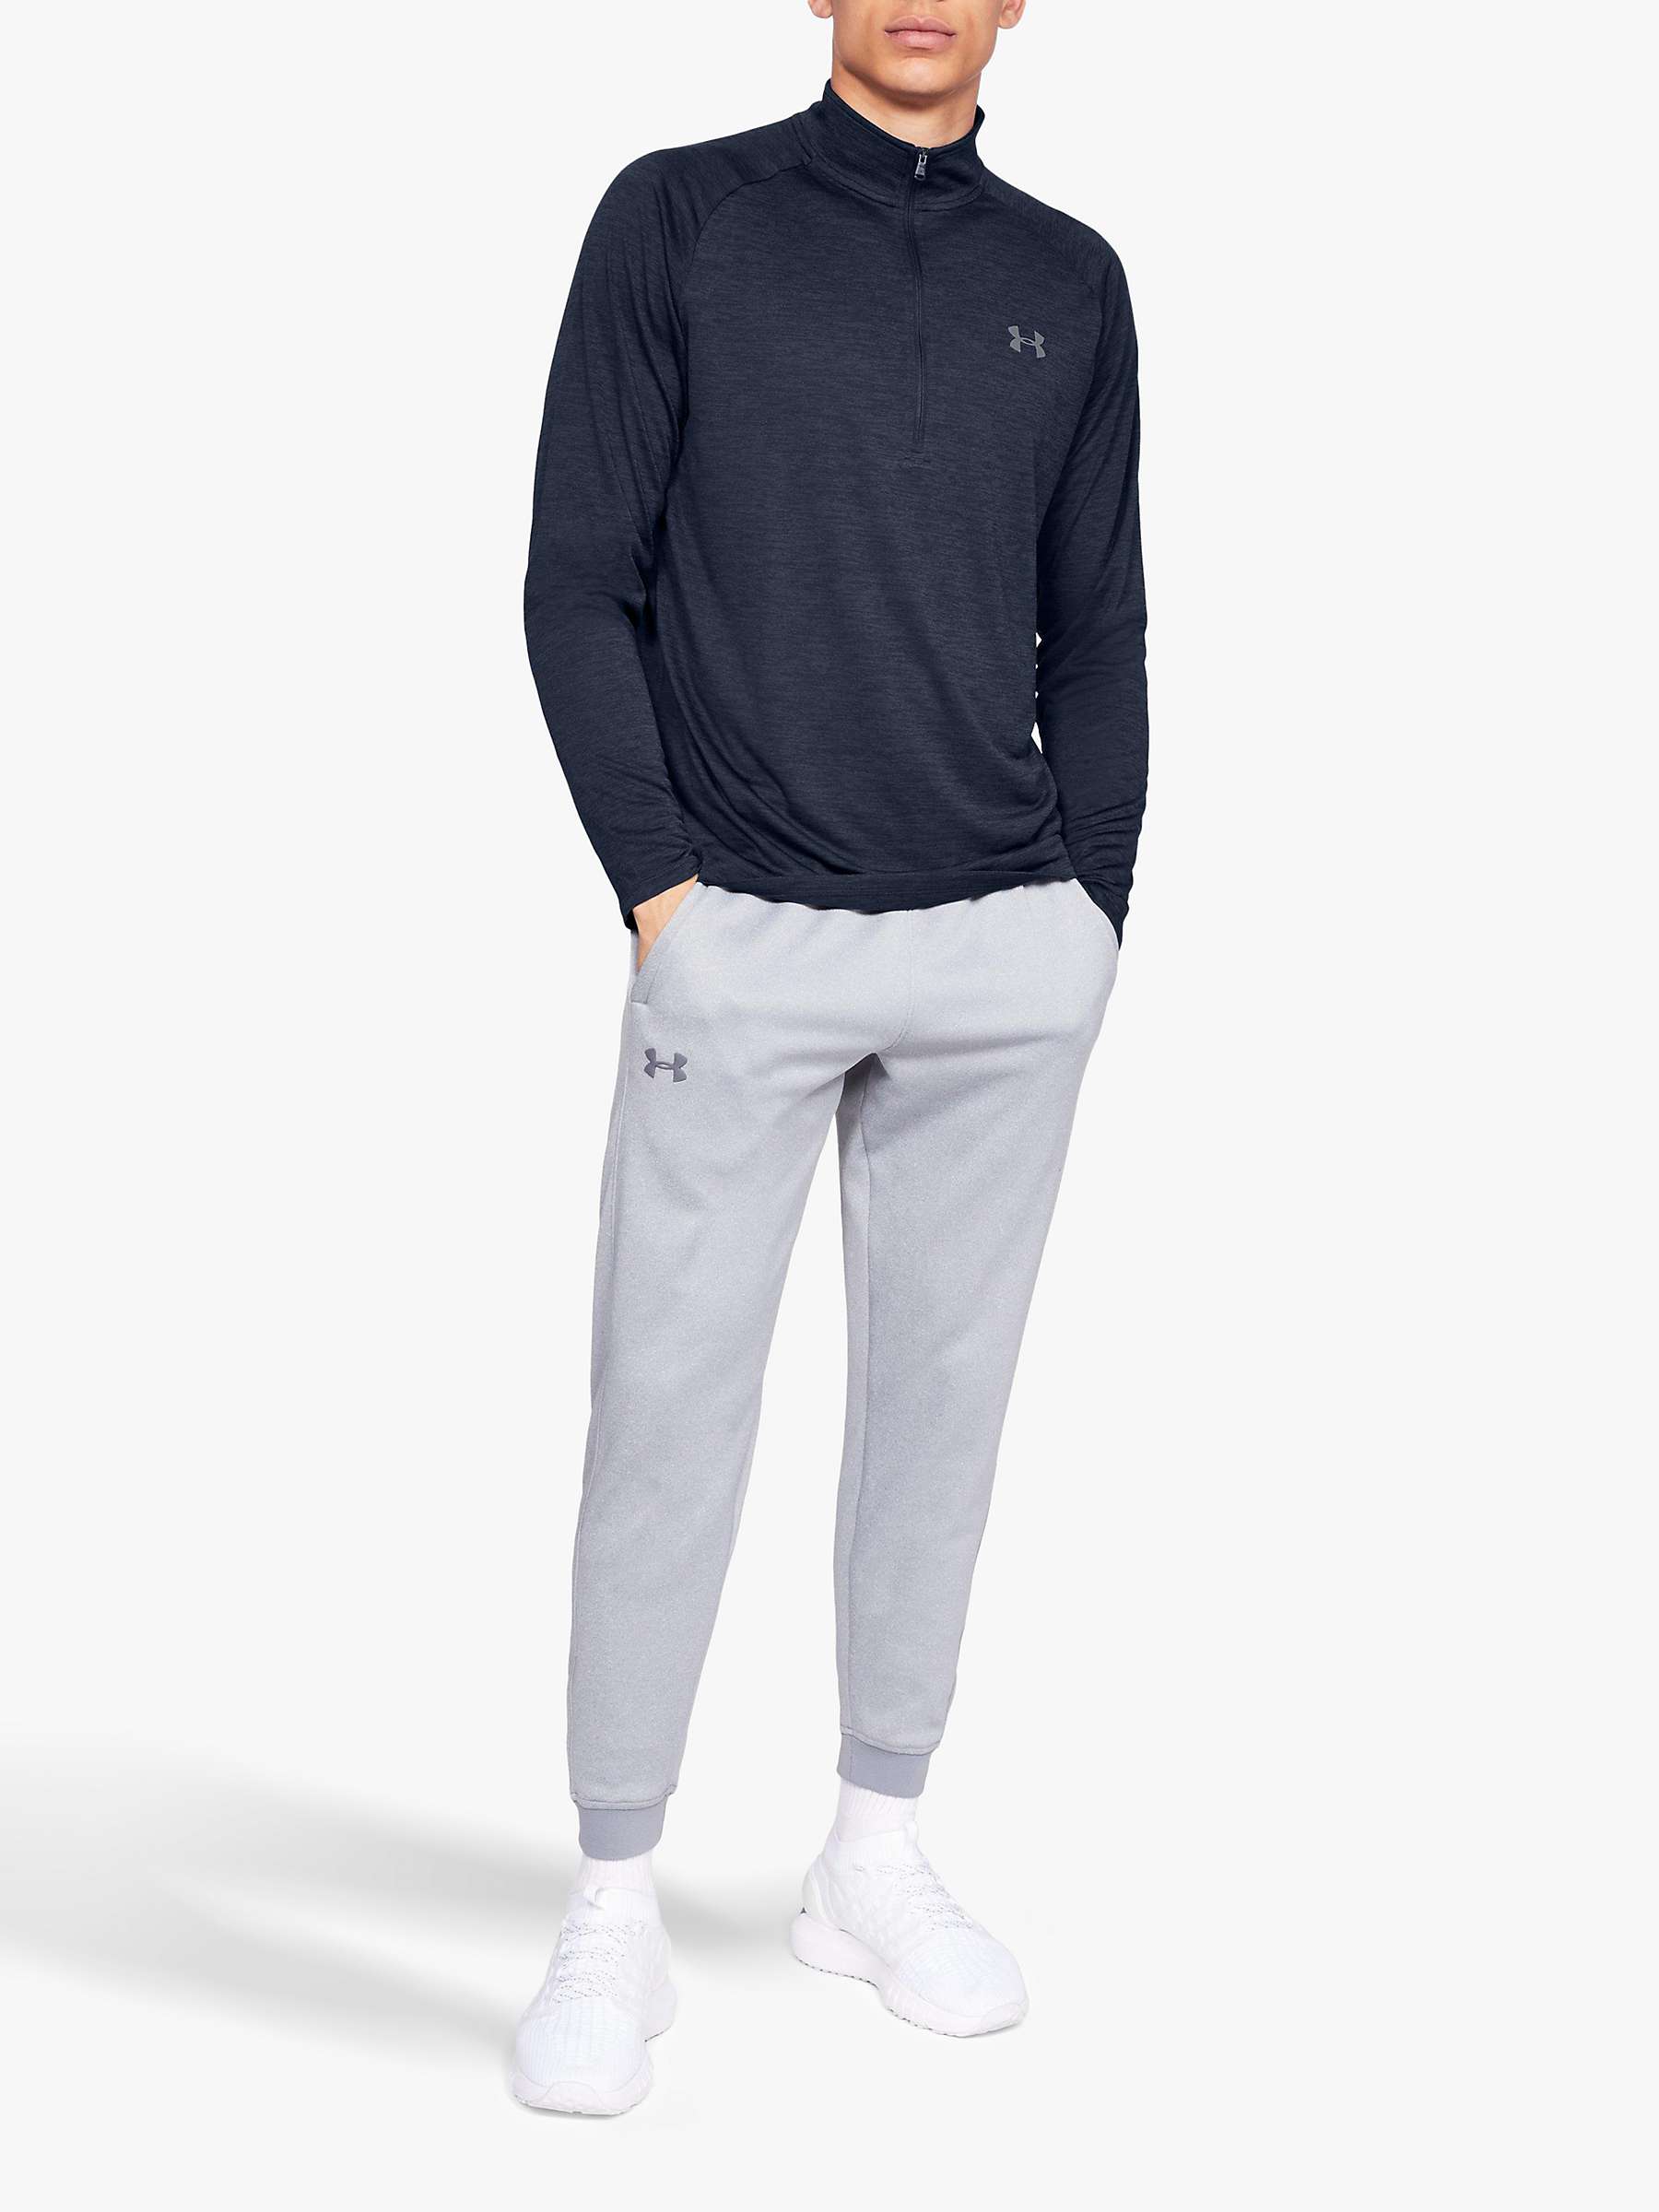 Buy Under Armour Tech 2.0 1/2 Zip Long Sleeve Gym Top Online at johnlewis.com